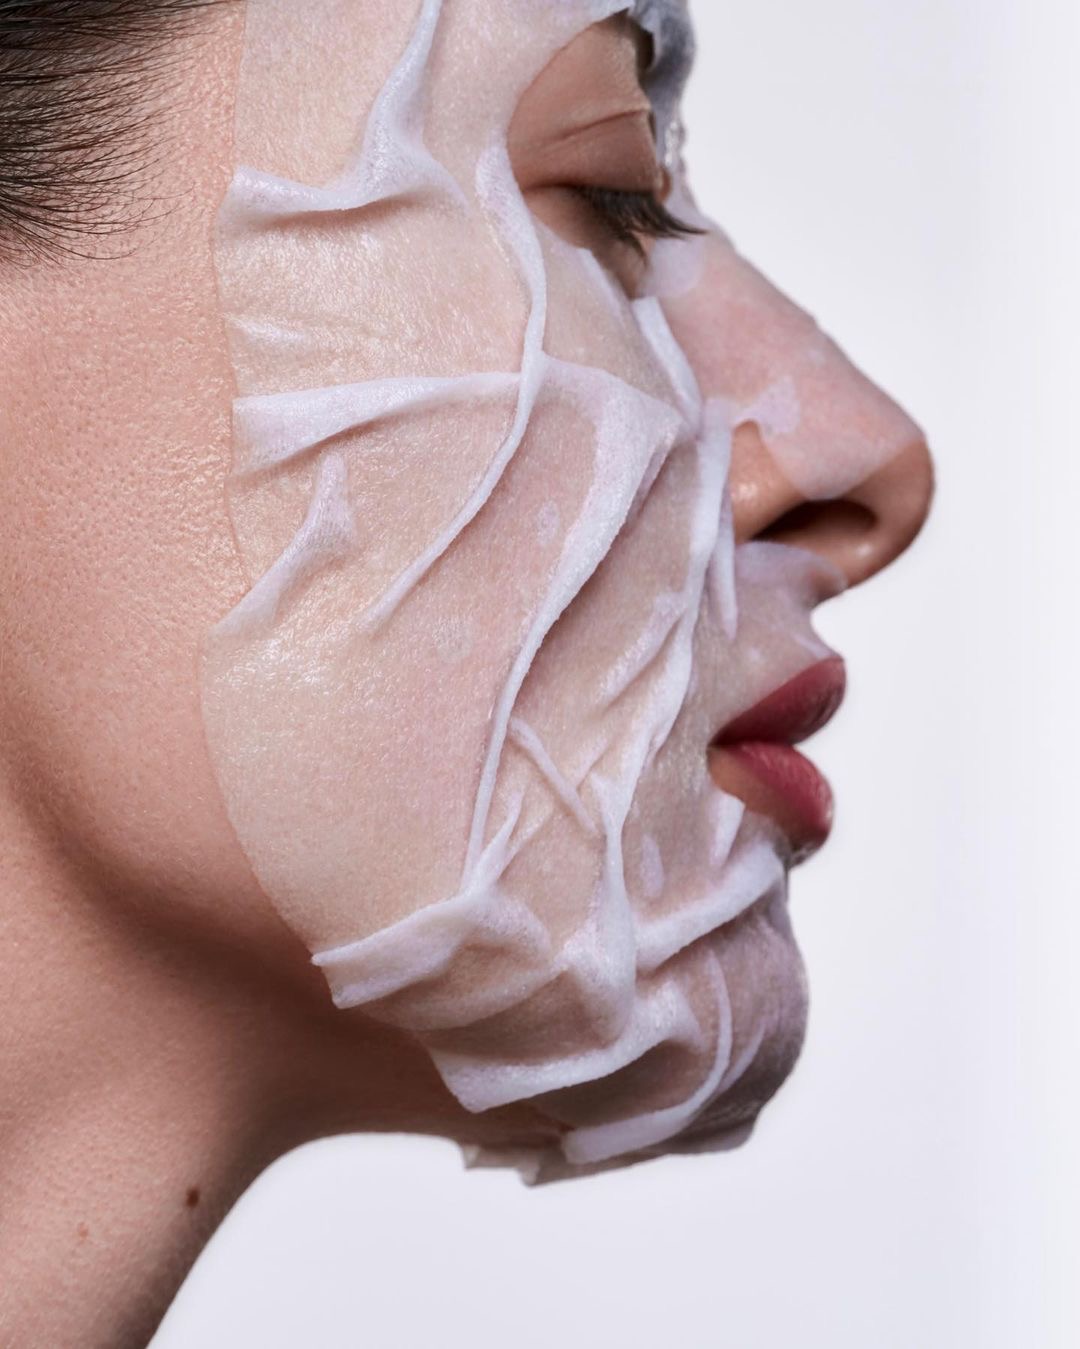 Classic Makeup Removal Mistakes Most Women Are Making ...